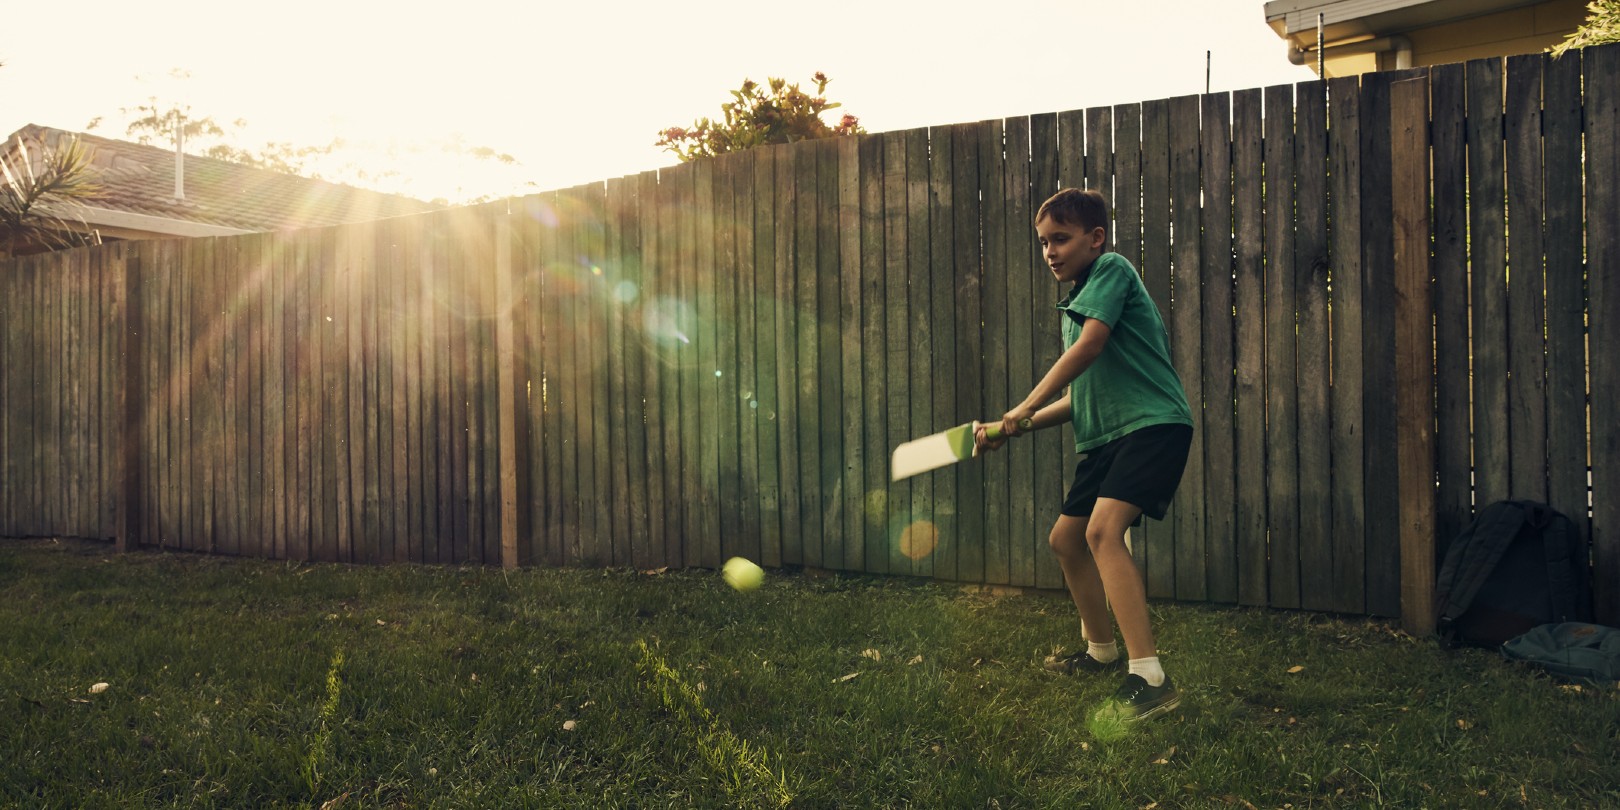 Shot of a young boy playing by himself in the backyard